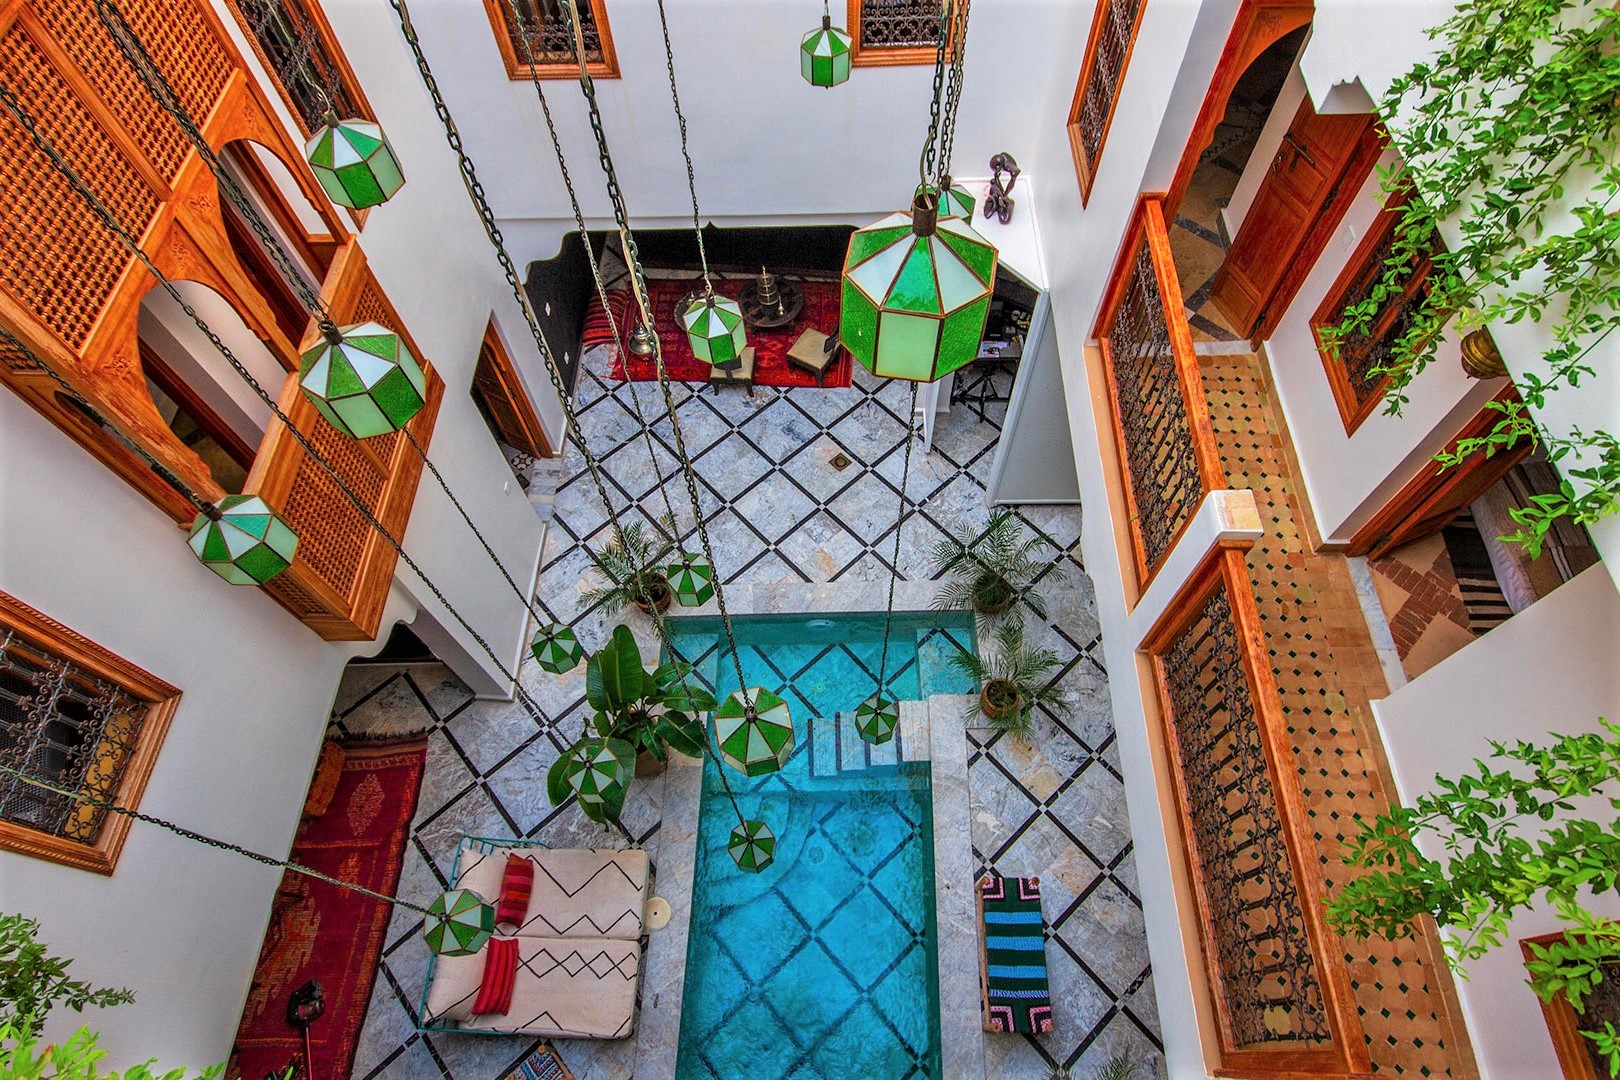 8 of the most beautiful riad patios in the heart of Marrakech